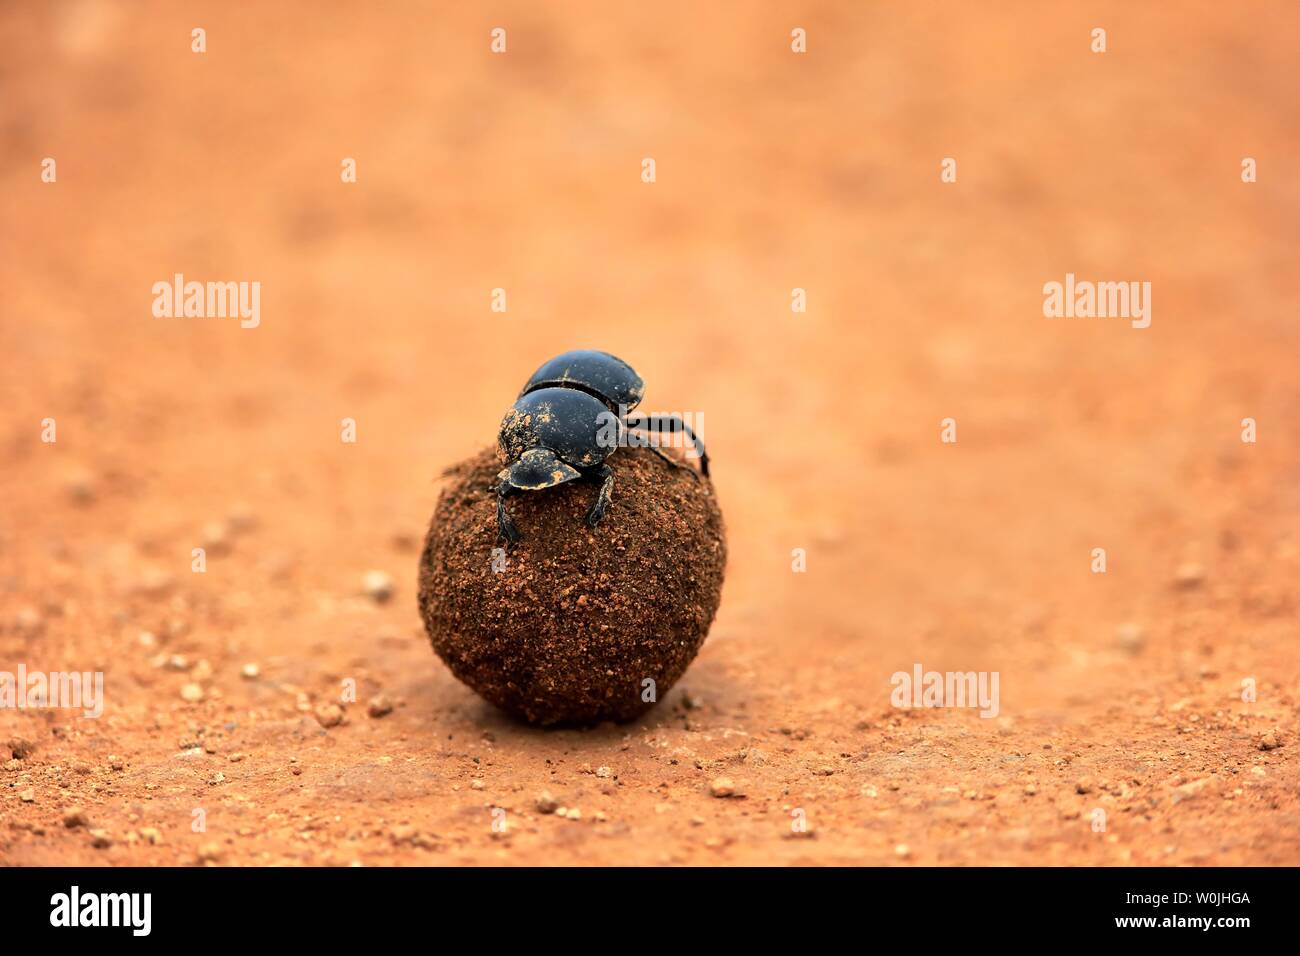 Dung beetle (Scarabaeus sacer), rolls ball of elephant dung, Addo Elephant National Park, Eastern Cape, South Africa Stock Photo